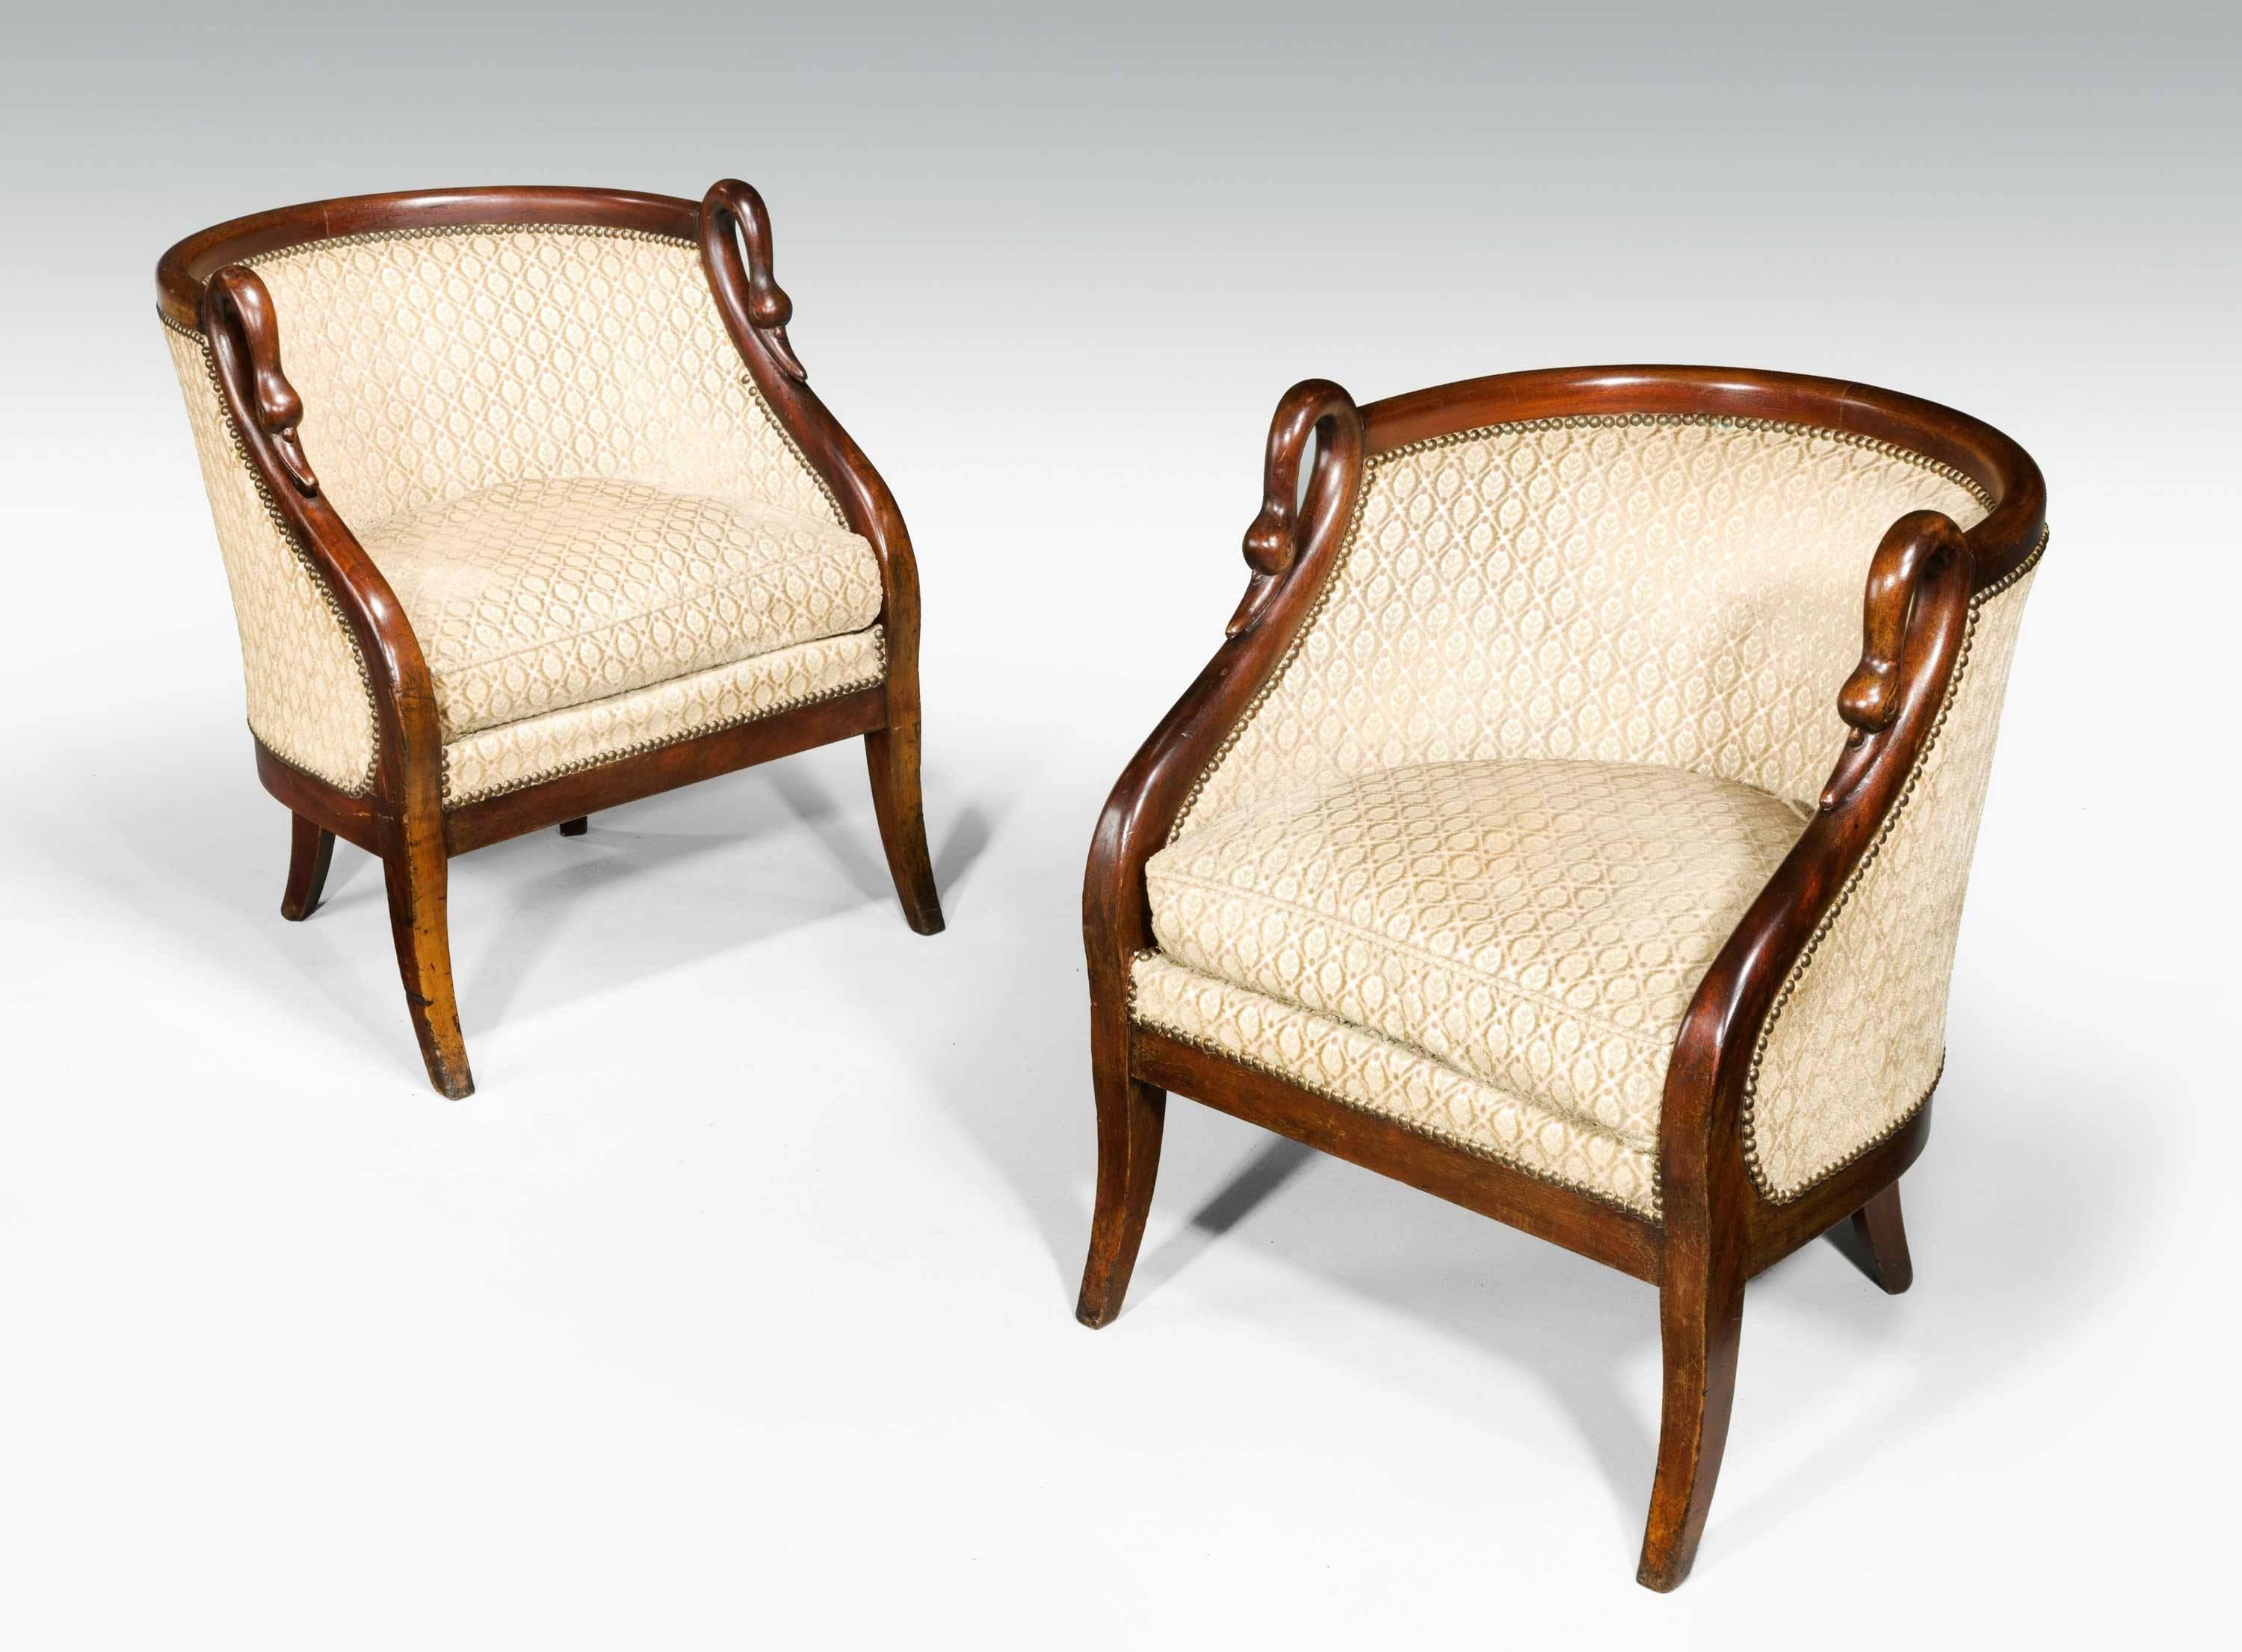 A pair of French mahogany framed armchairs with simulated swans neck uprights, very well figured timber on gentle sabre supports

RR.